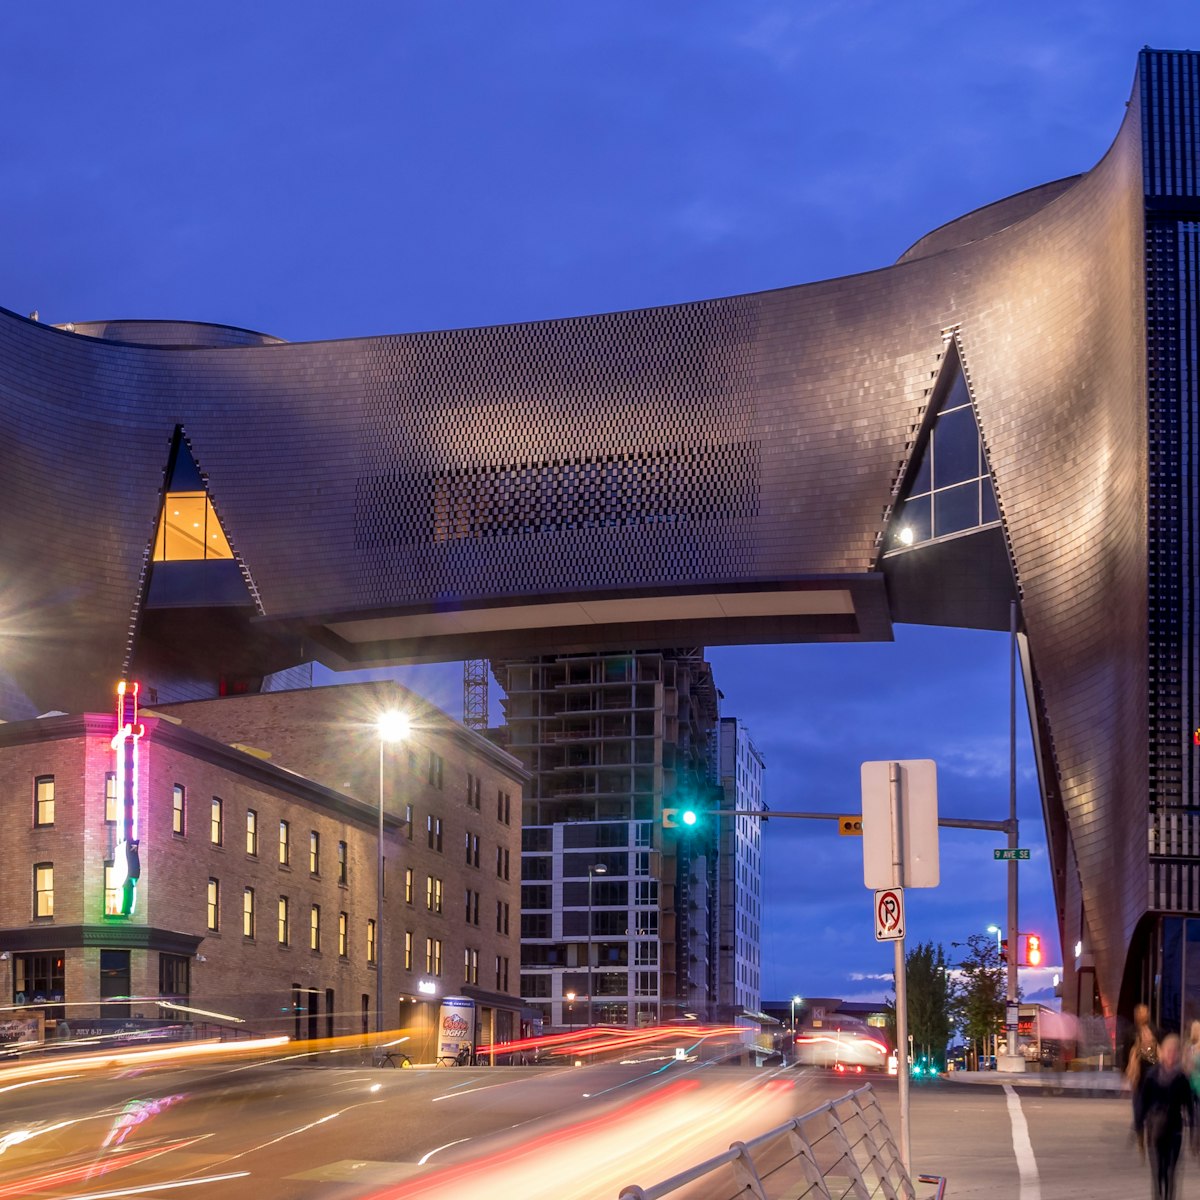 CALGARY, CANADA - July 15: Studio Bell, home of the National Music Centre on July 15, 2016 in Calgary, Alberta. The National Music Centre is a major new music venue and museum in Calgary.; Shutterstock ID 454978084